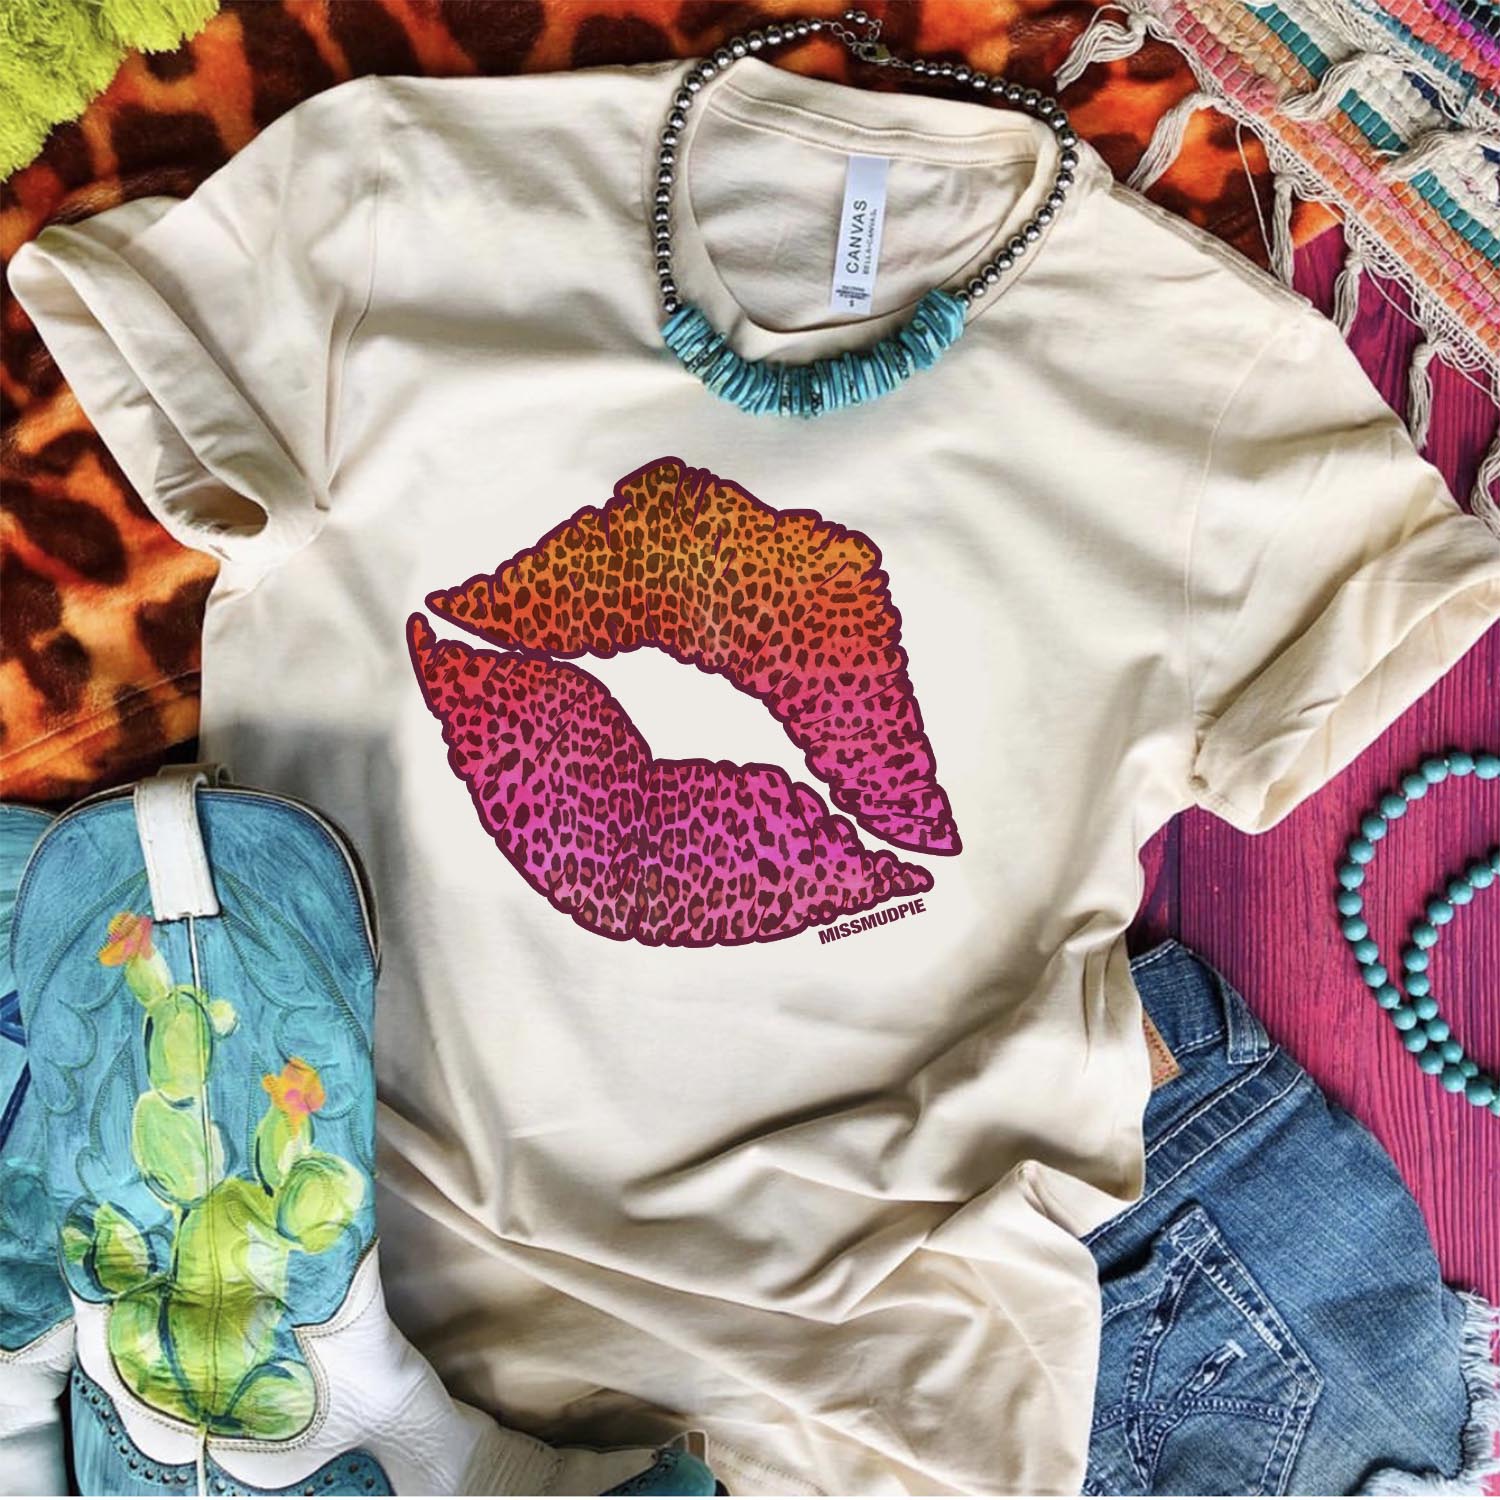 An ivory tee shirt laid on a purple wooden background with cowgirl boots, denim shorts, turquoise and silver necklace, and mix print rugs. The tee shirt has a graphic that is a leopard print kiss outline.